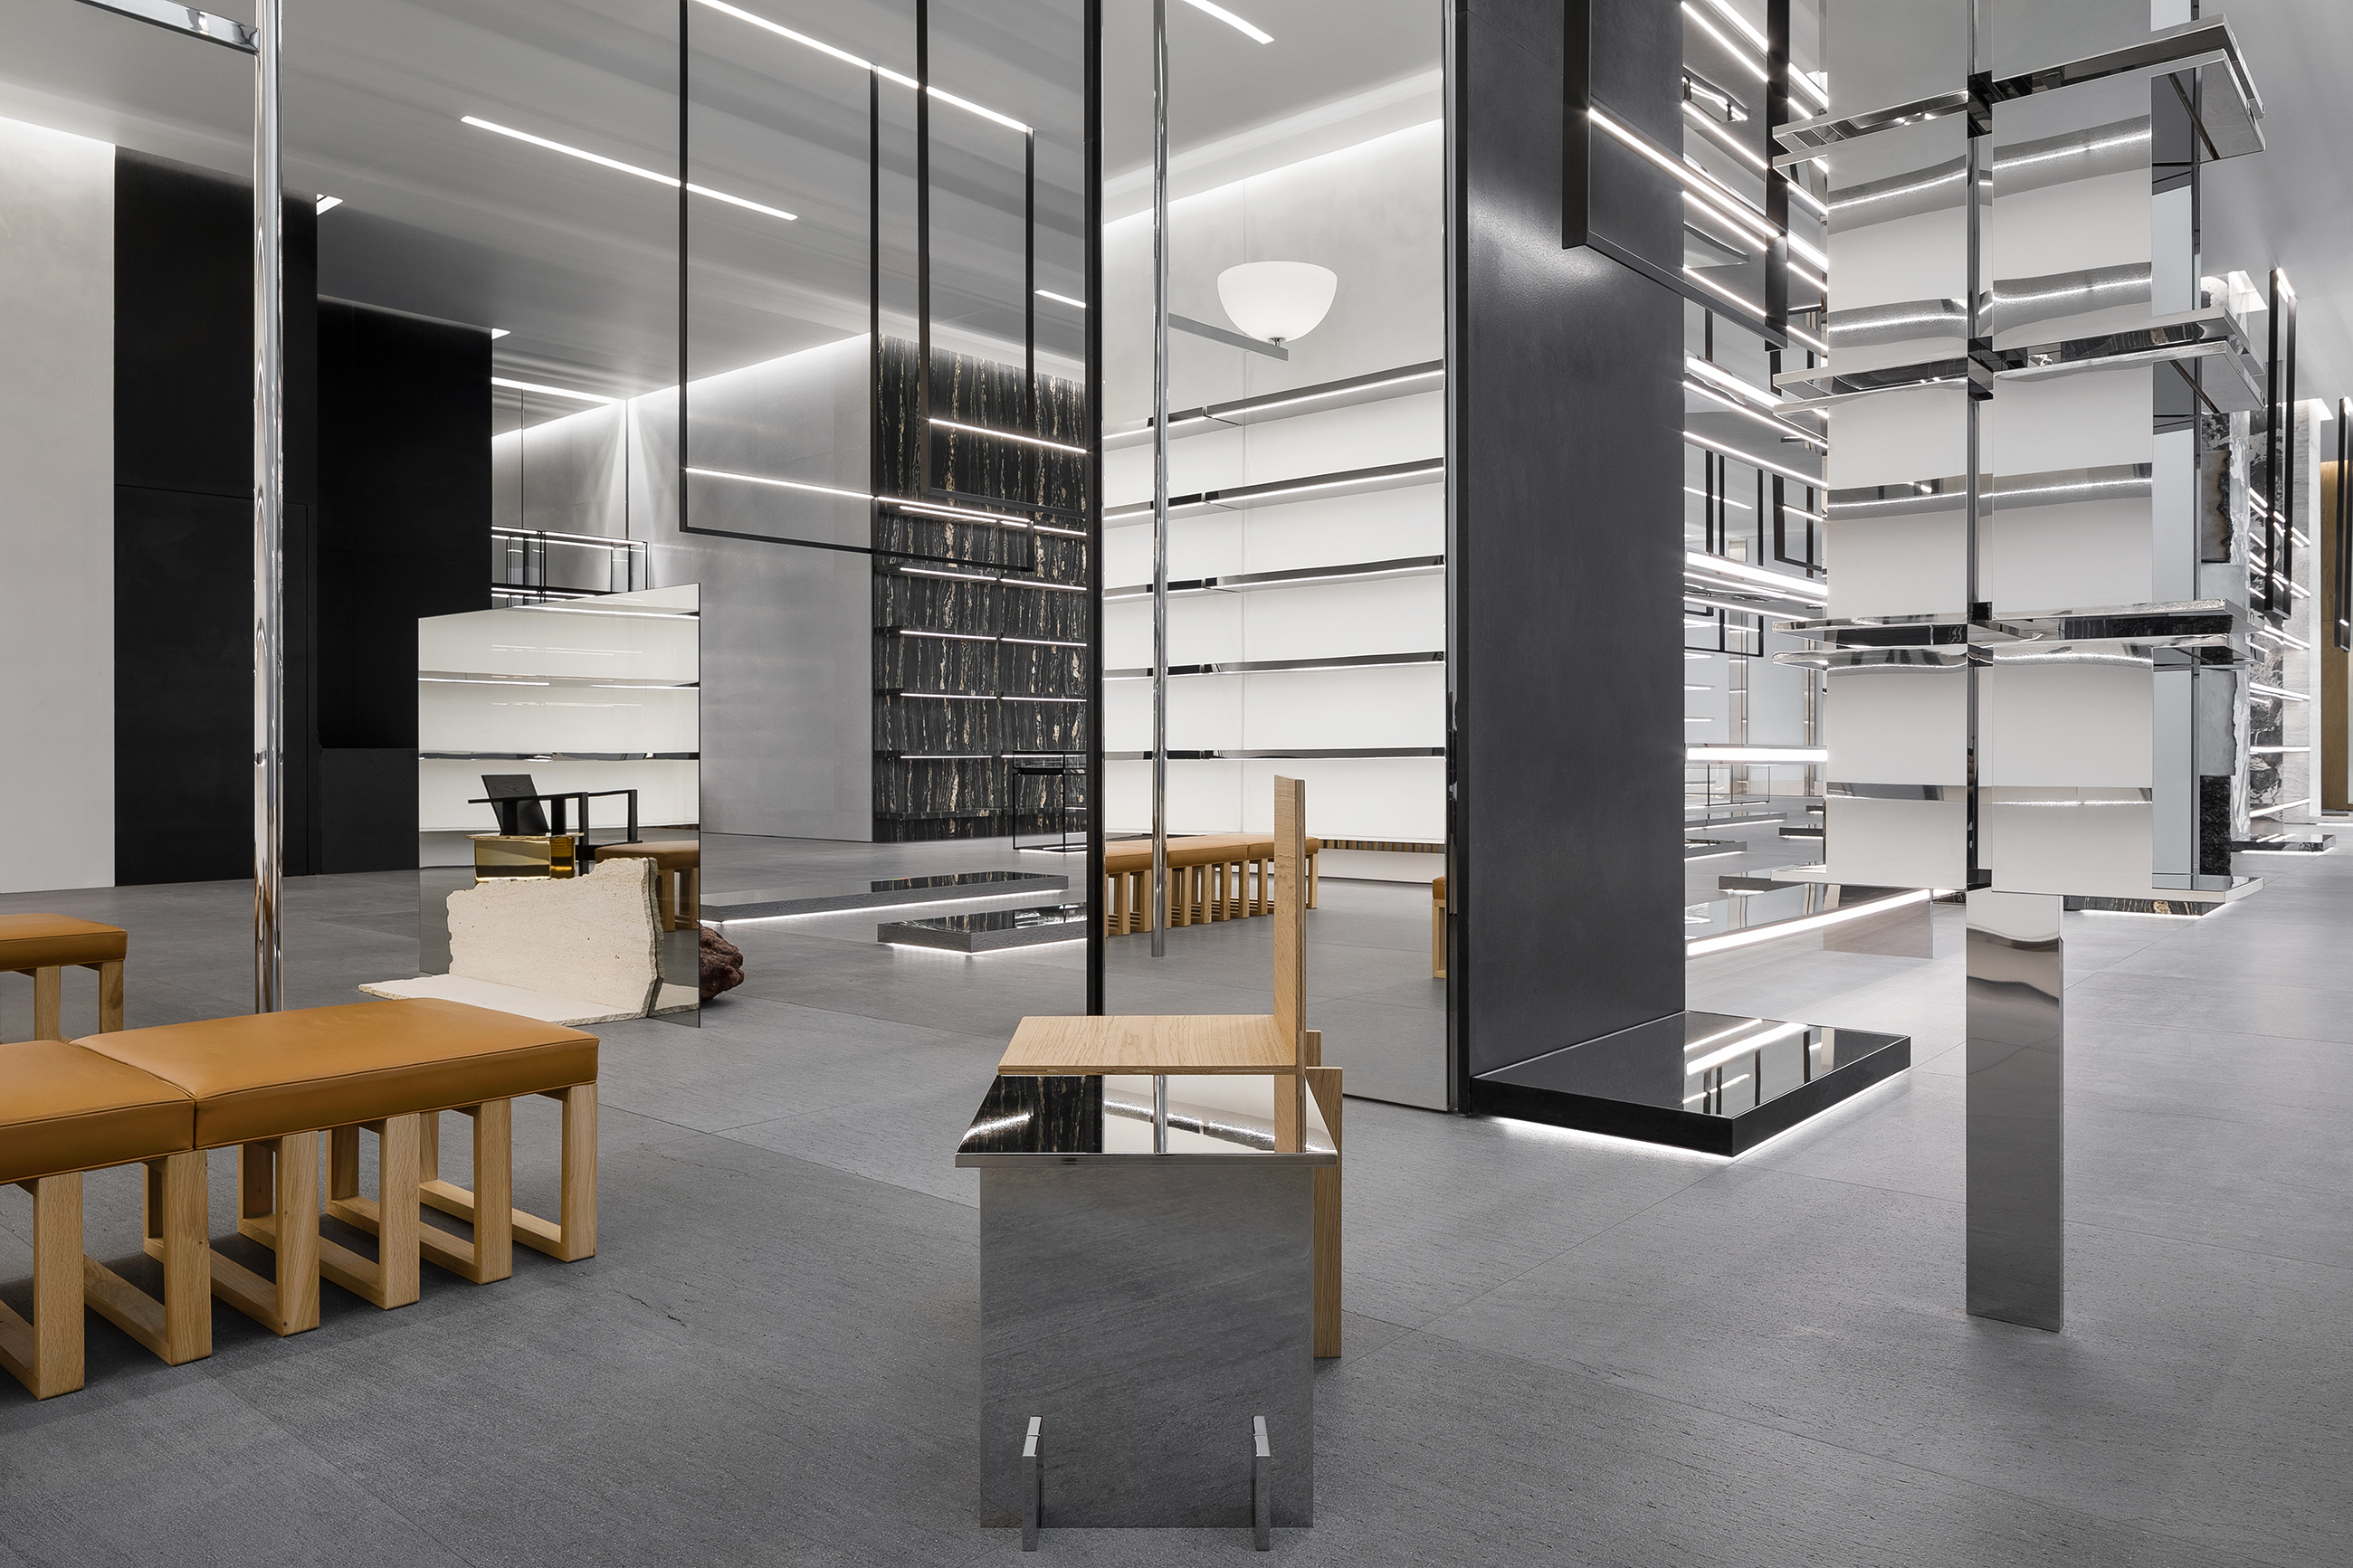 Luxury Brand Celine Opens Three London Boutiques in 18 Months - Sajo